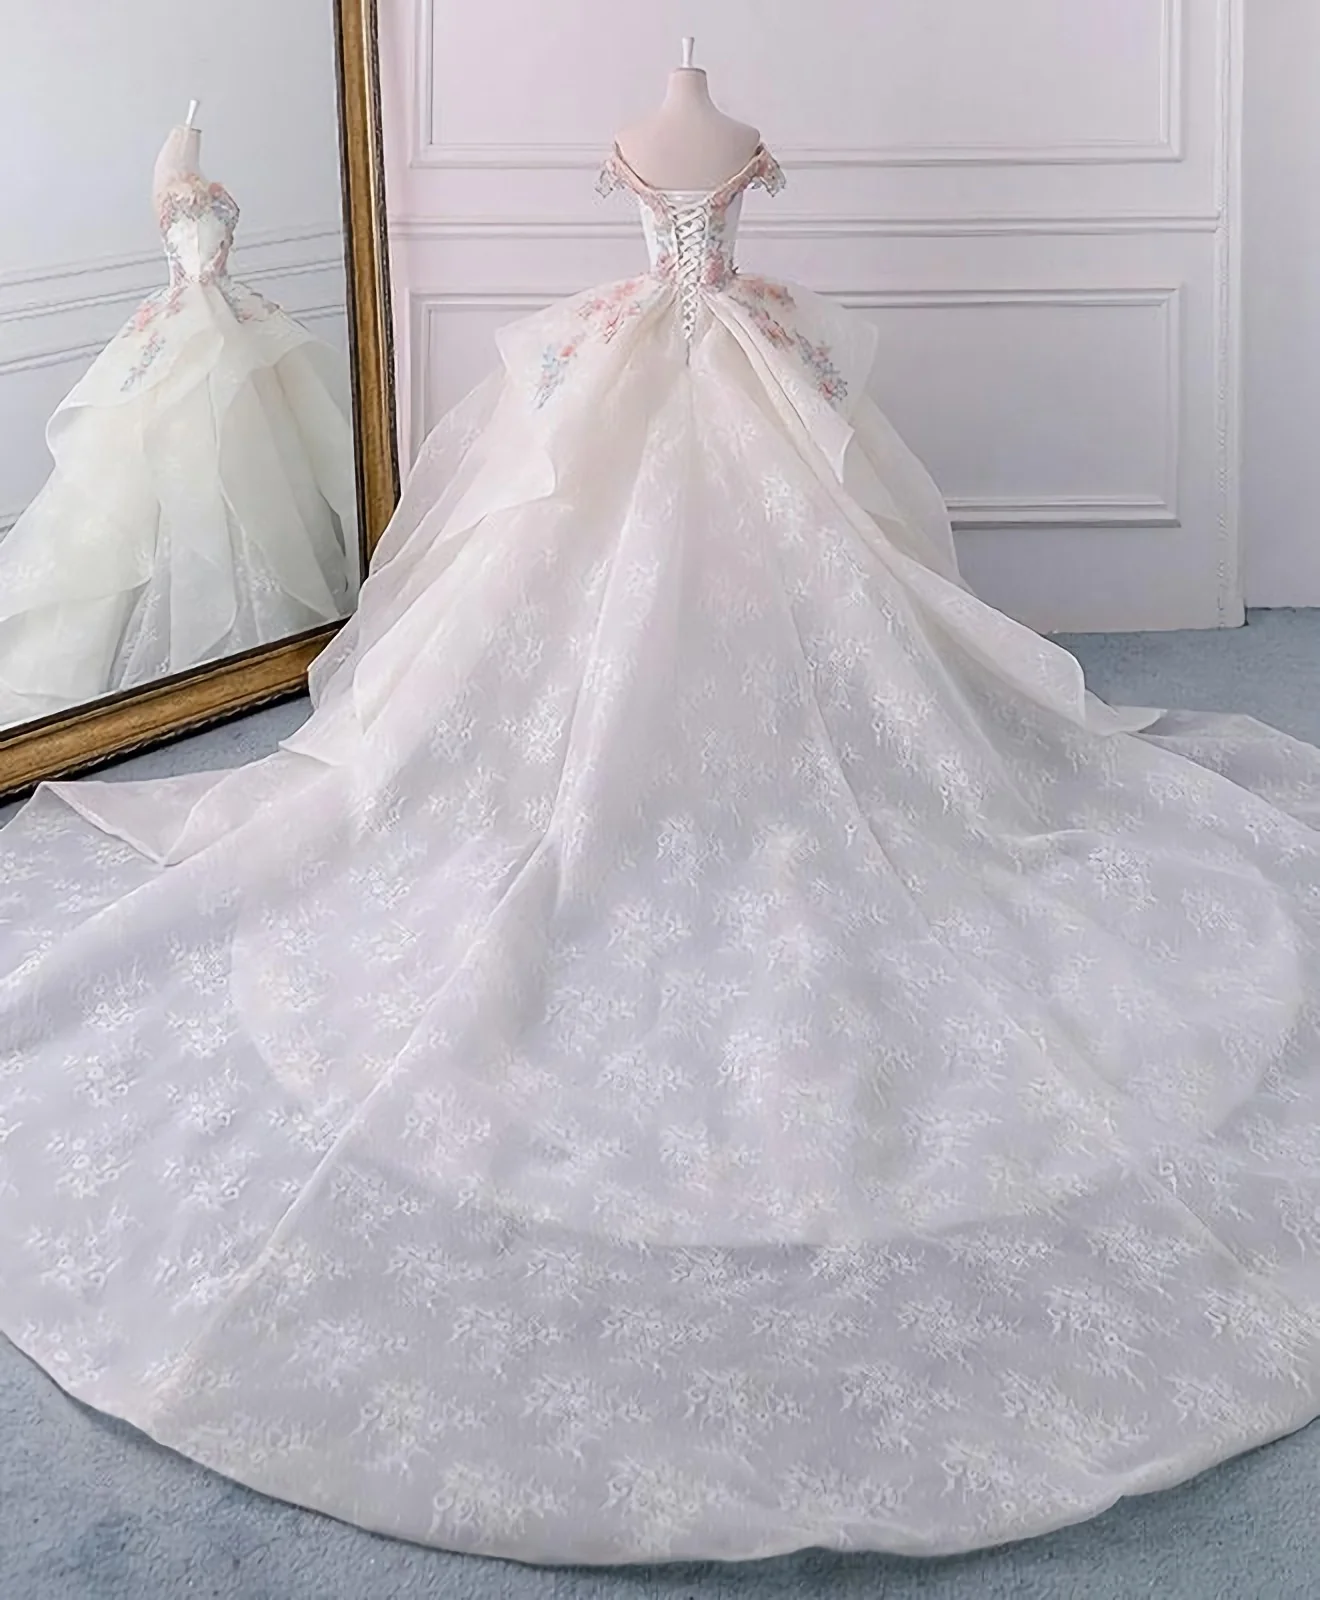 Stunning Off The Shoulder Flower Ball Gown Lace Wedding Dress Y1145